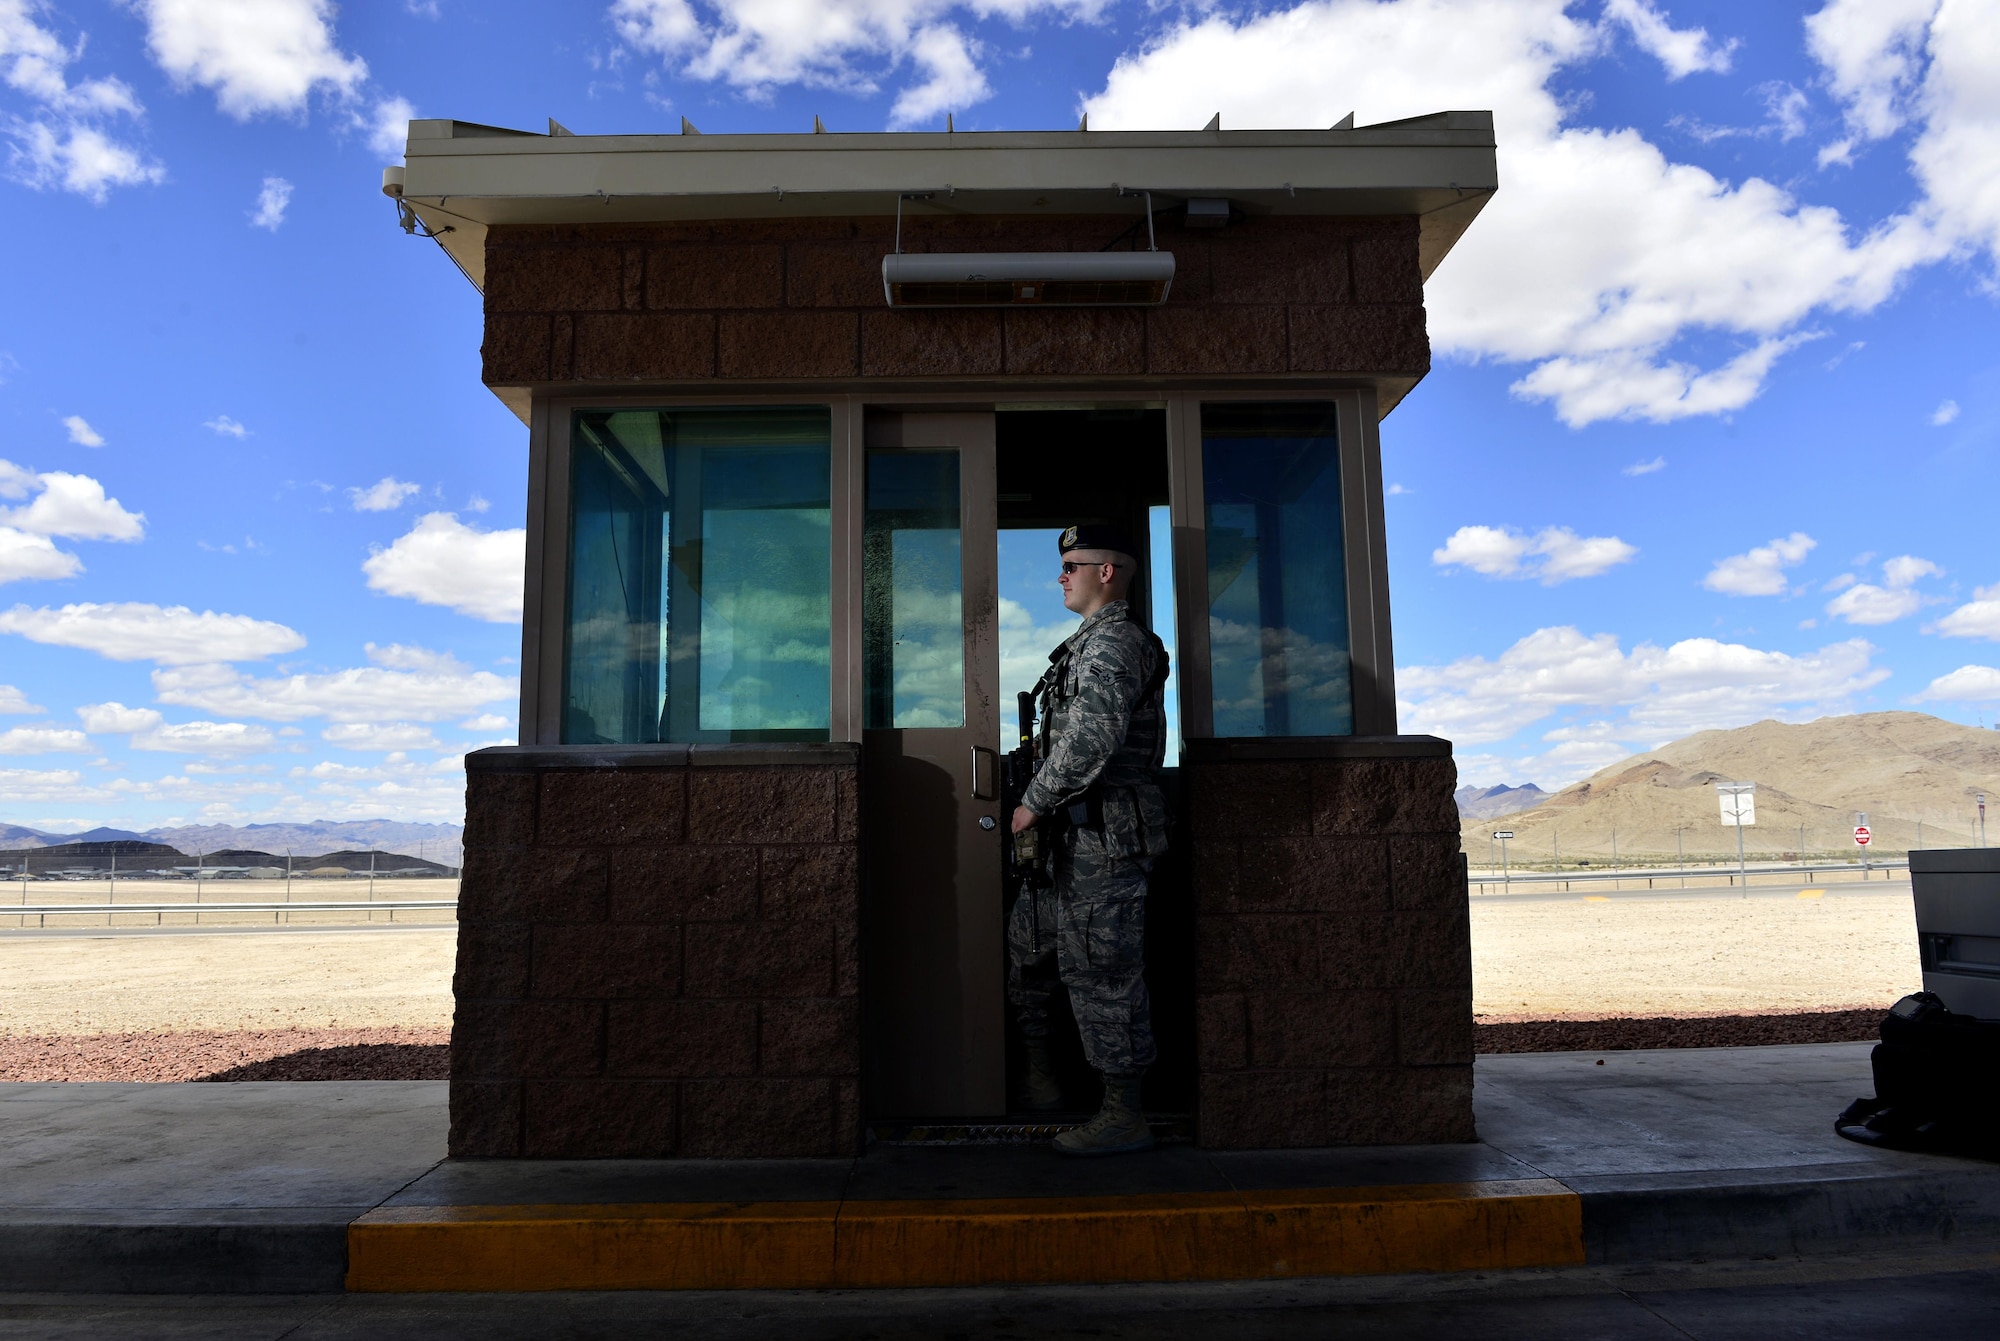 Airman 1st Class Elijah, 799th Security Forces Squadron security forces member, stands guard at the base entry control center May 16, 2016, at Creech Air Force Base, Nevada. National Police Week takes place annually to honor the service and sacrifice of civilian and military law enforcement members. (U.S. Air Force photo by Senior Airman Christian Clausen/Released)